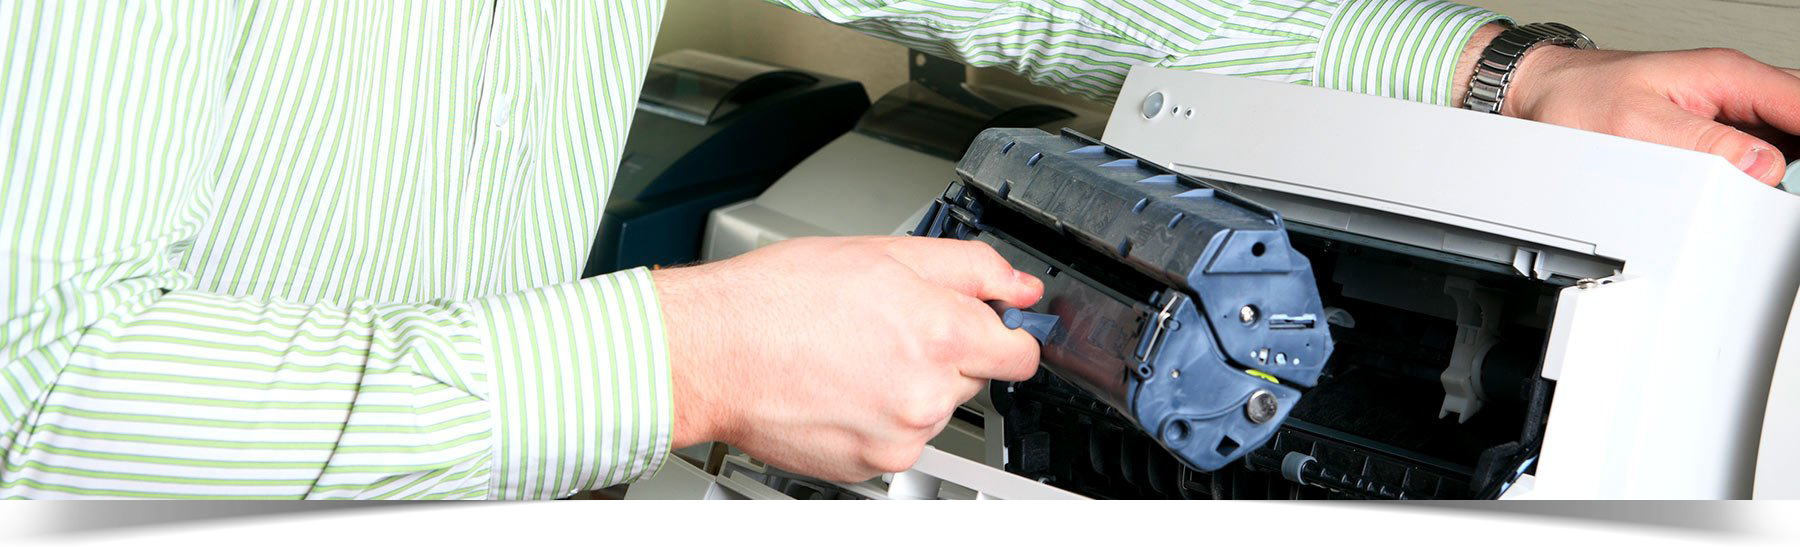 Whether you need new equipment, repair services, or commercial printing supplies such as toner cartridges, Print Source is here for you.